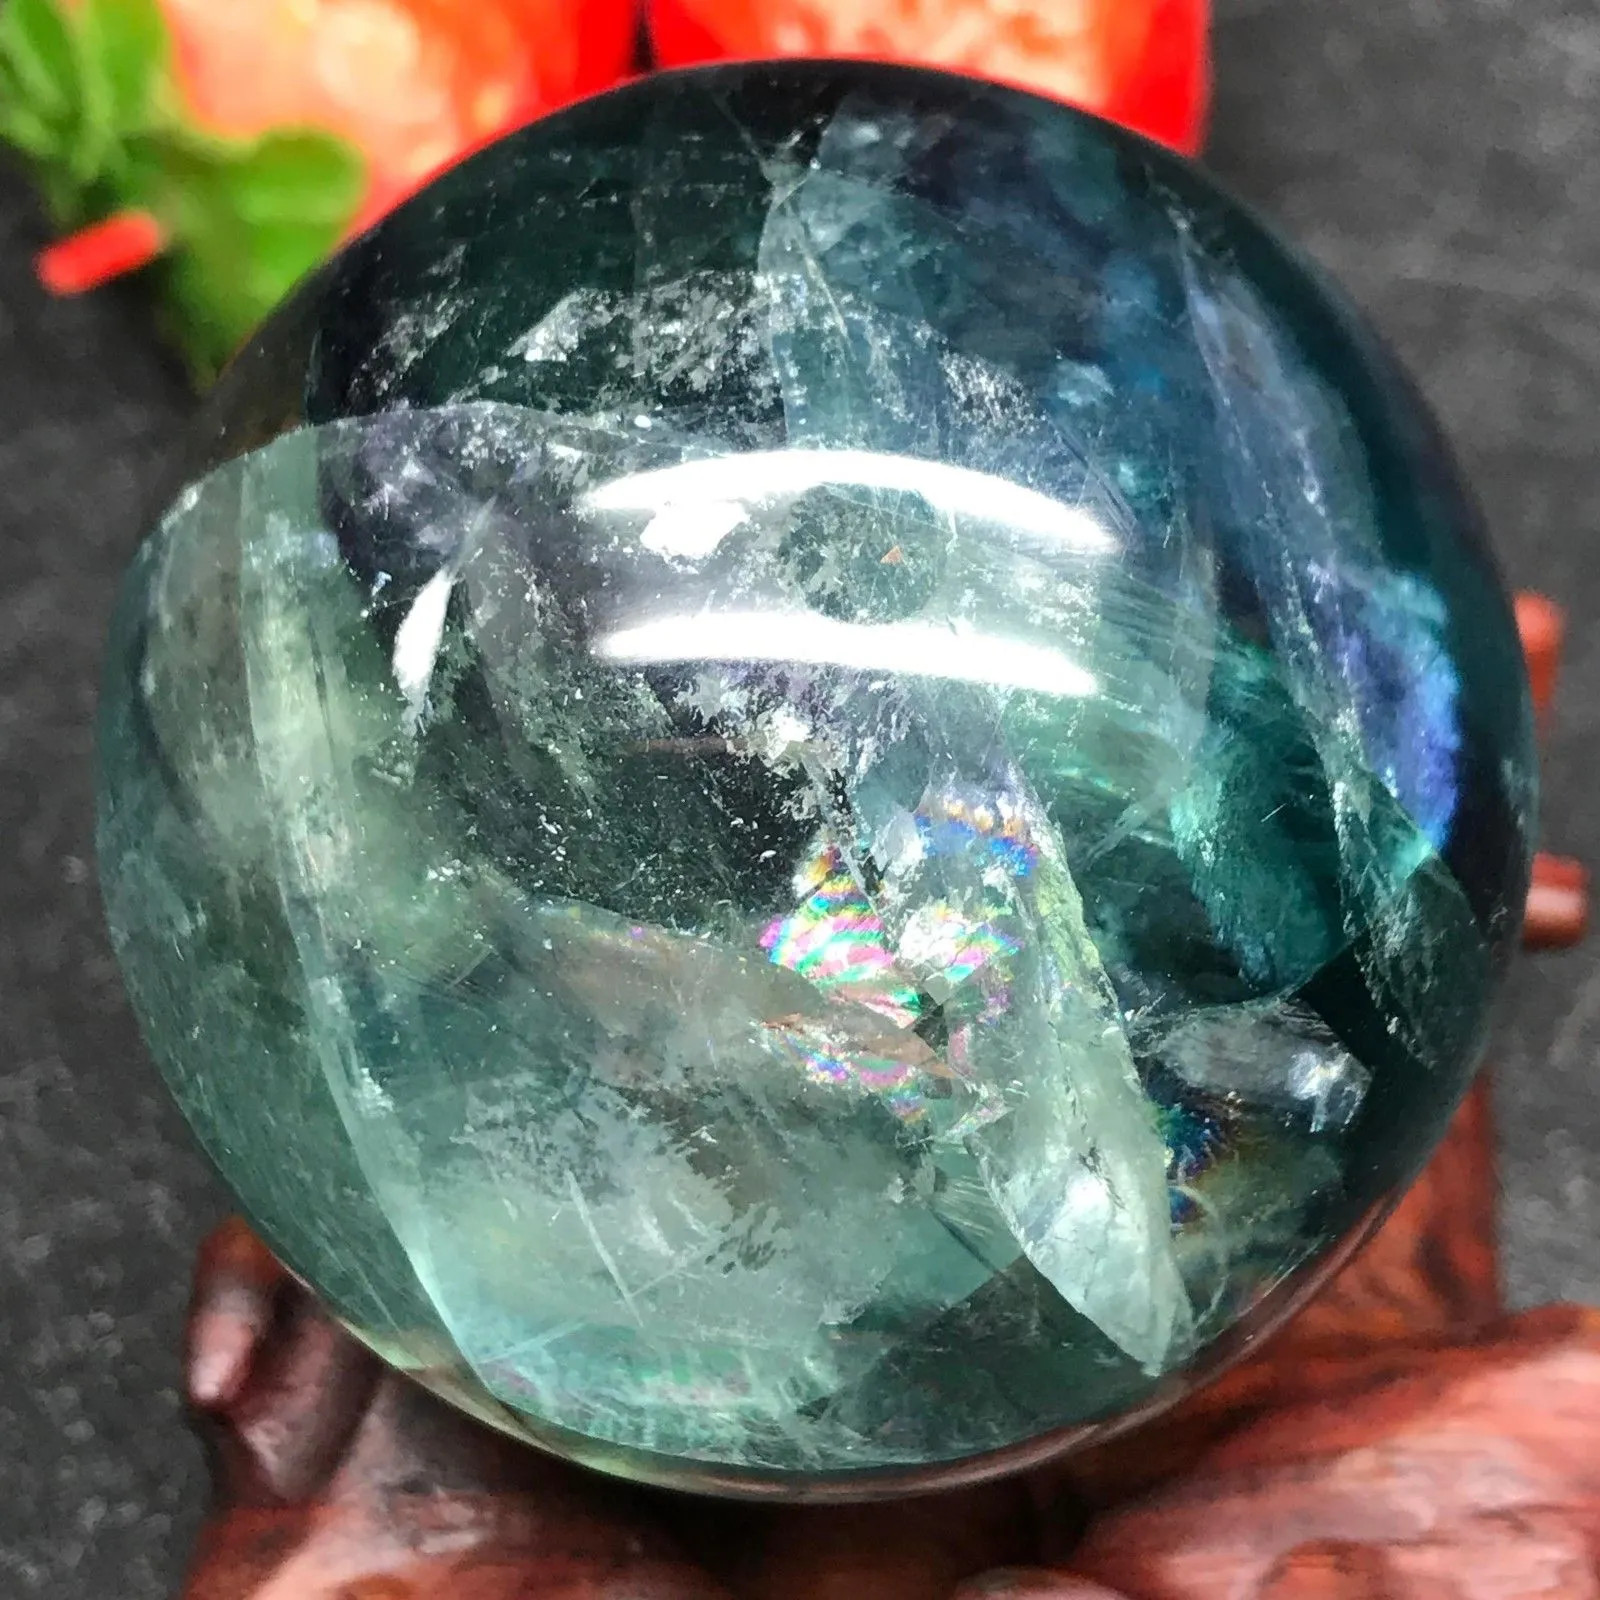 About 200gAbout 50mm Natural Fluorite Quartz Crystal Sphere Ball HealingHalloween giftHome decoration4356418